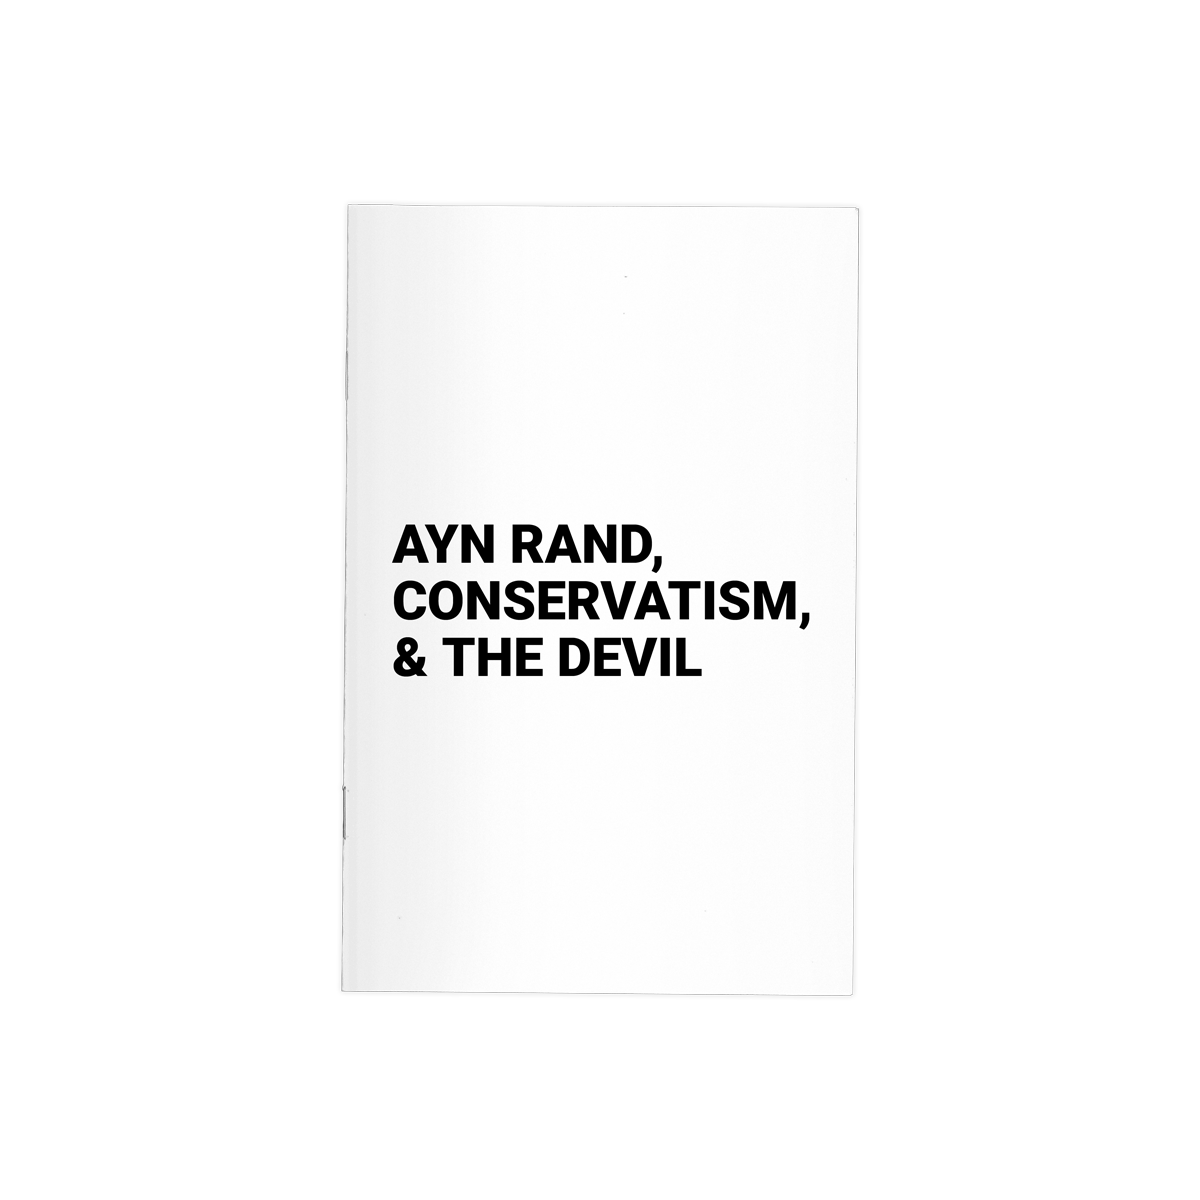 Ayn Rand, Conservatism, & the Devil - 16 Page 8.5 x 5.5 in. Saddle-Stitched Booklet.